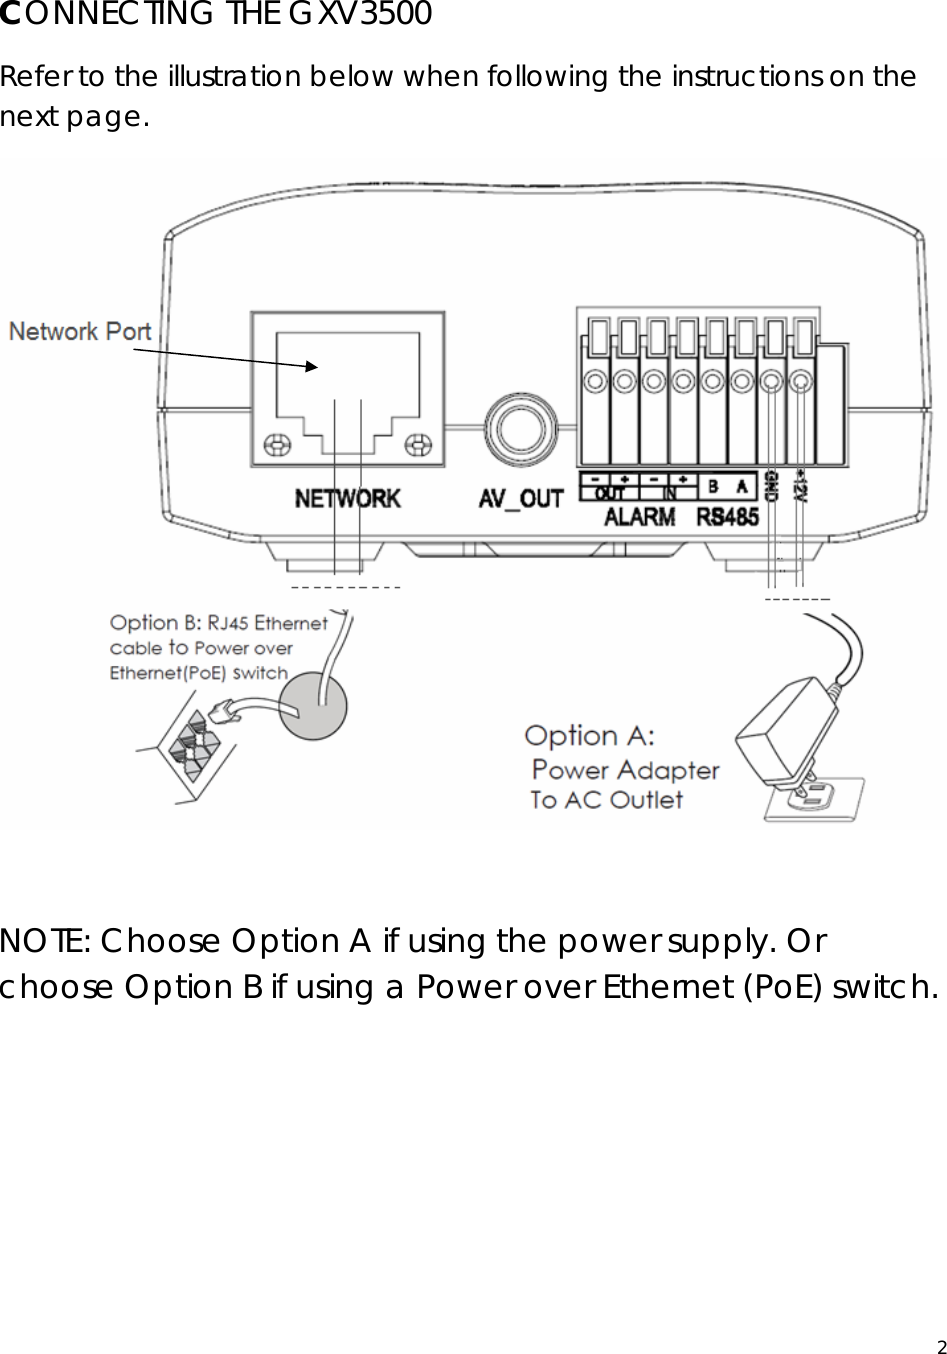  2 CONNECTING THE GXV3500 Refer to the illustration below when following the instructions on the next page.   NOTE: Choose Option A if using the power supply. Or choose Option B if using a Power over Ethernet (PoE) switch.        